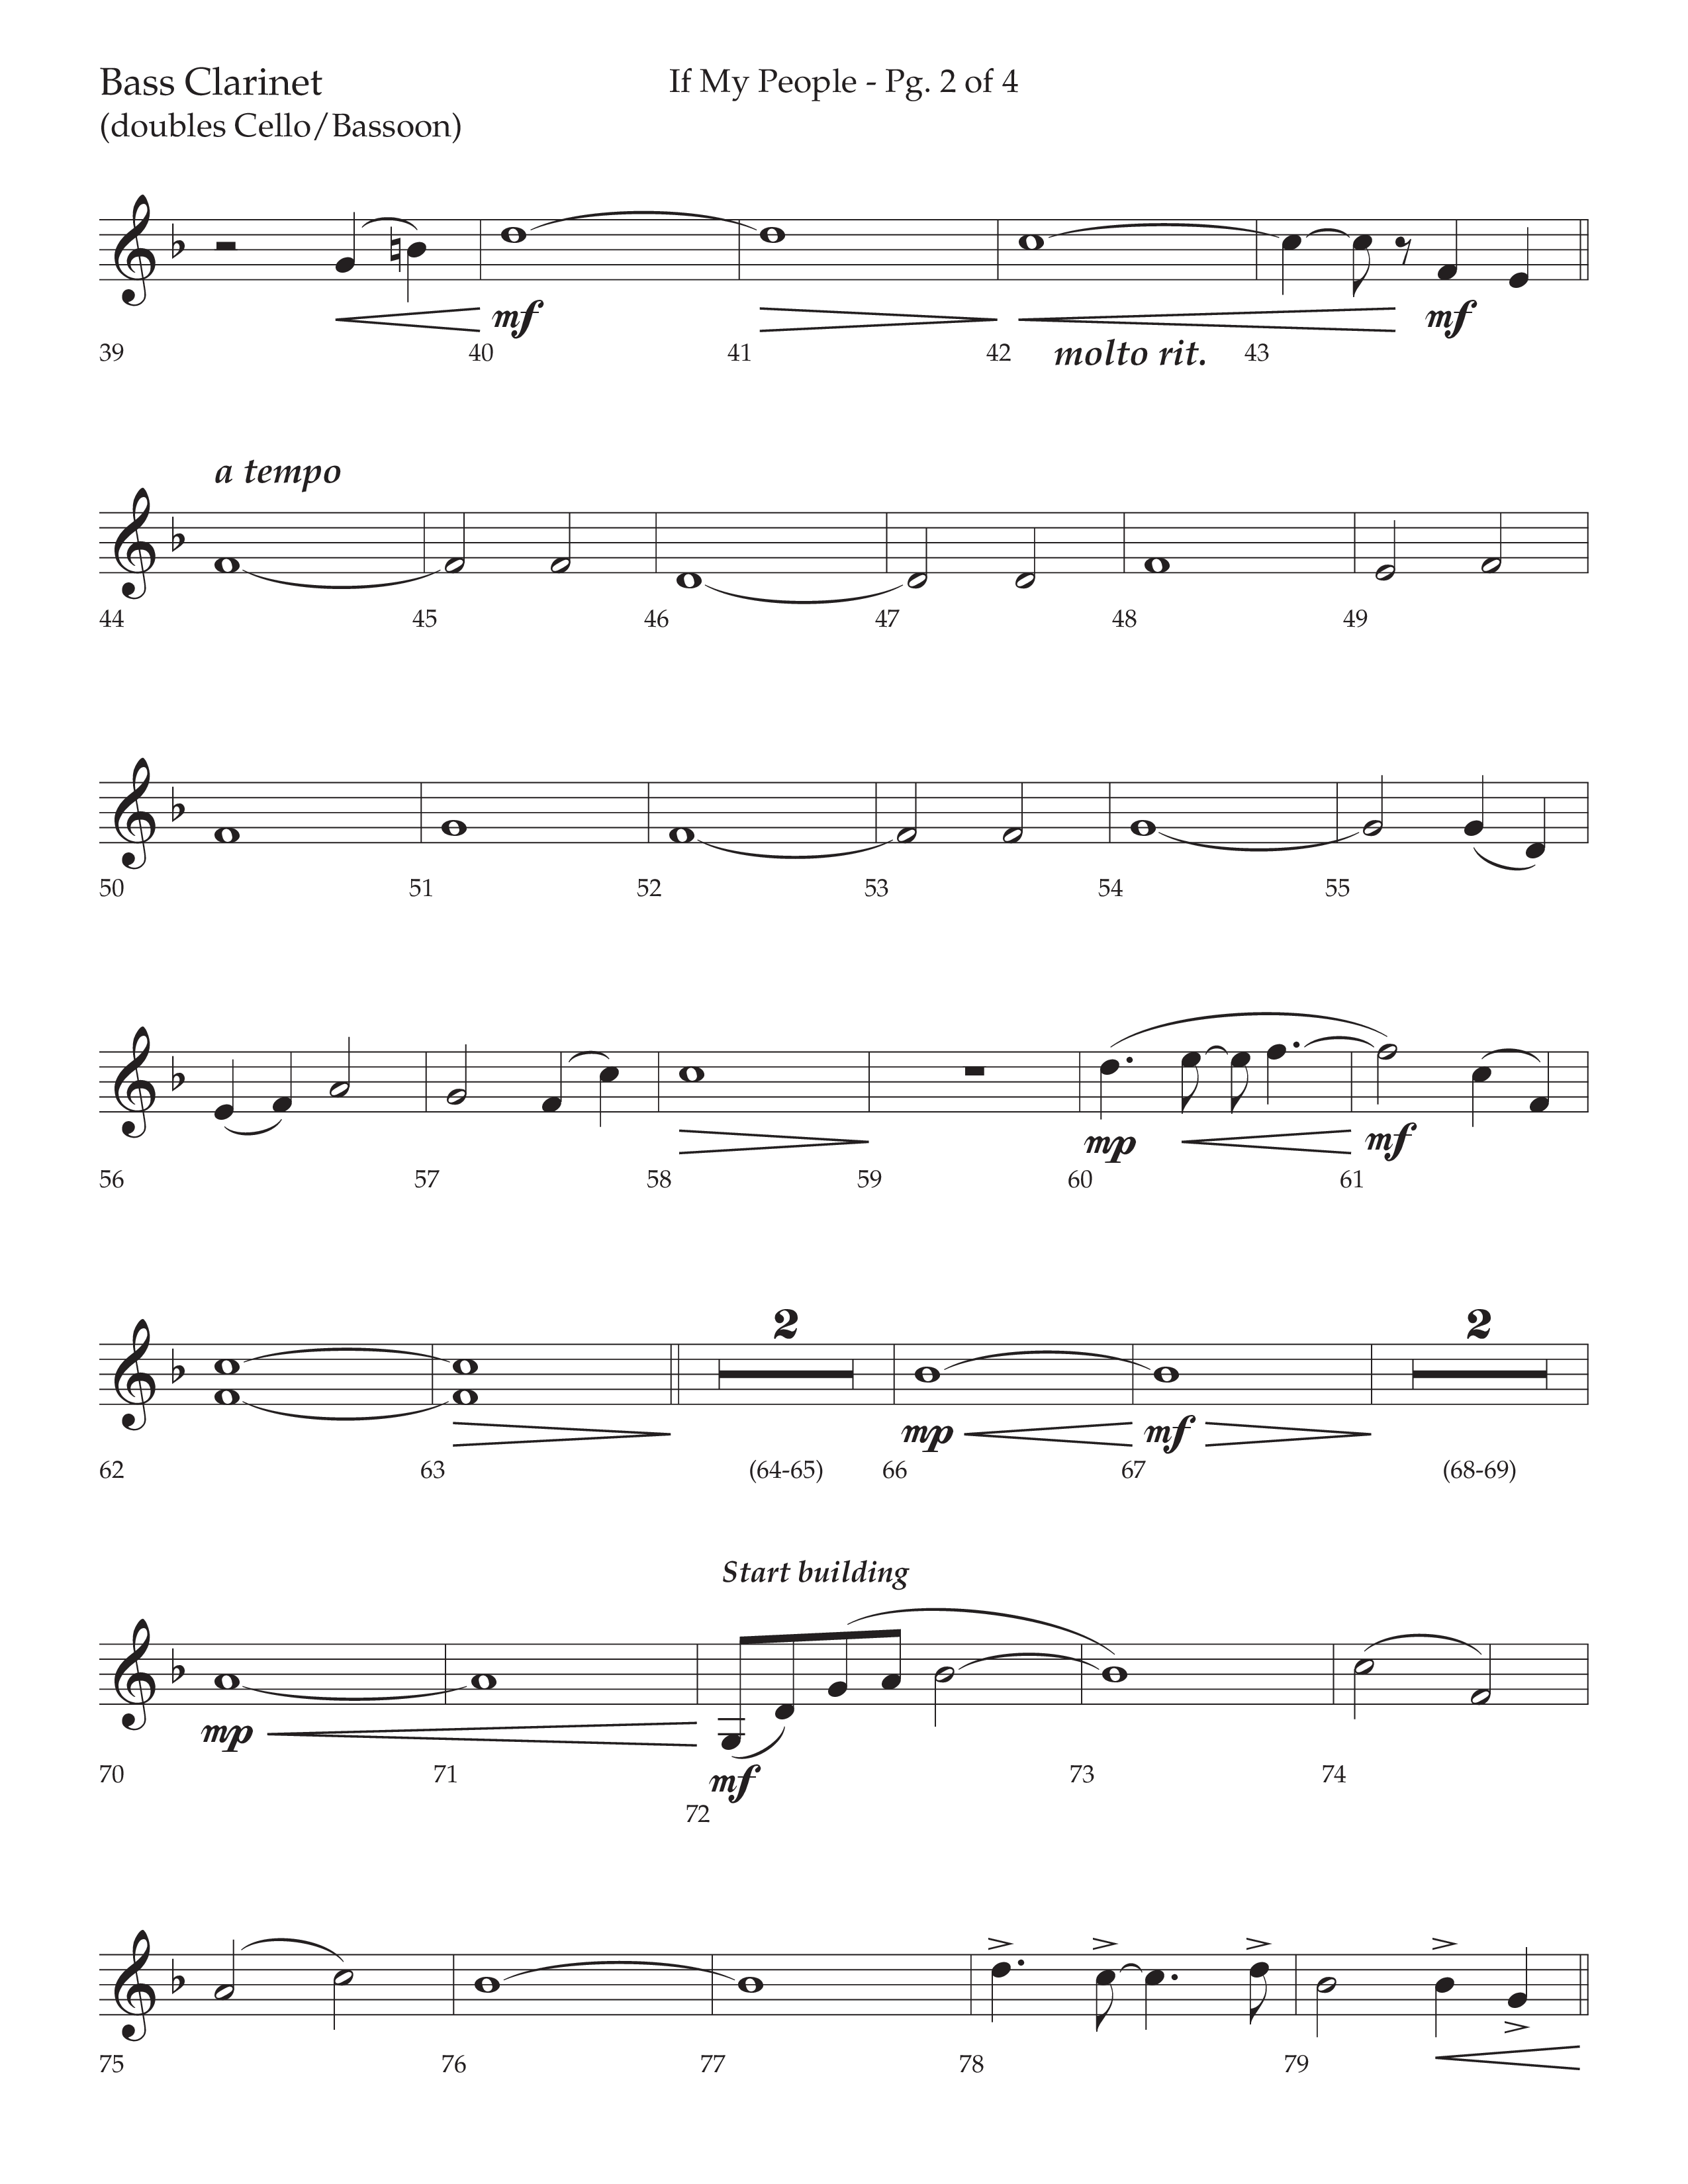 If My People (Choral Anthem SATB) Bass Clarinet (Lifeway Choral / Arr. David Wise / Orch. David Shipps)